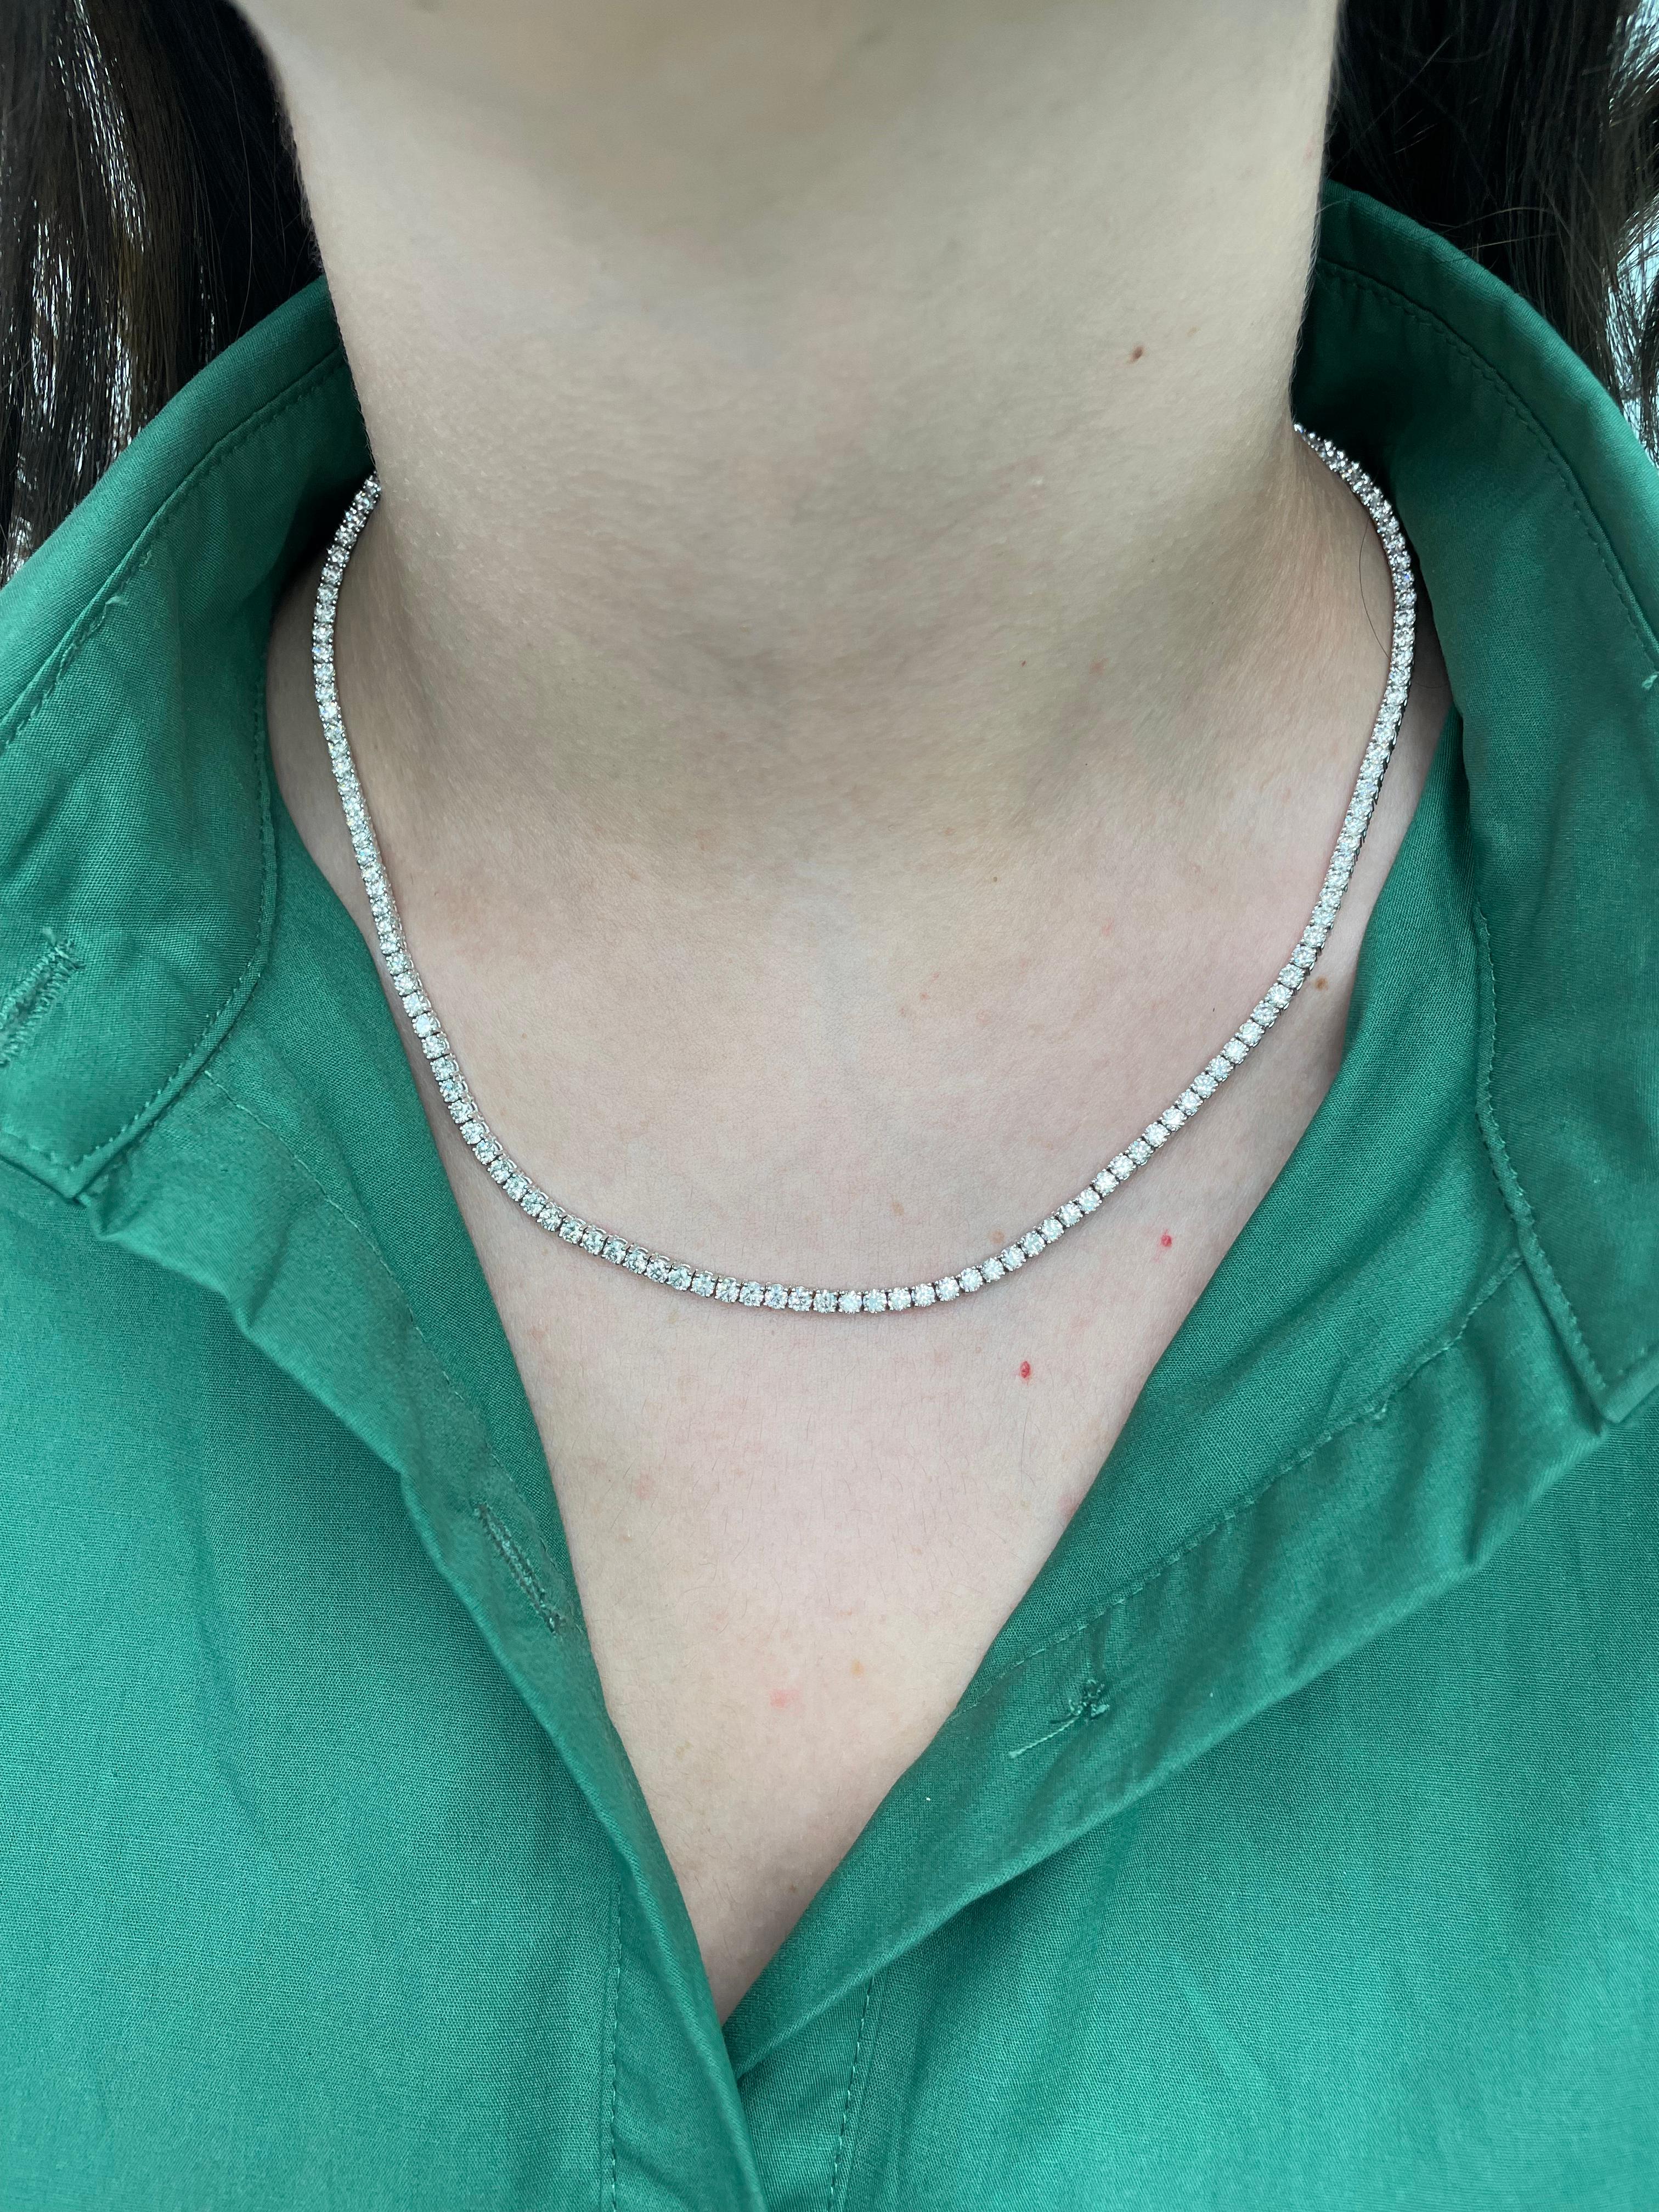 Beautiful and classic diamond tennis necklace, by Alexander Beverly Hills.
12.32 carats of round brilliant diamonds, approximately G/H color and VS clarity. 18k white gold, 13.38 grams, prong set, 18.5in.
Accommodated with an up-to-date appraisal by